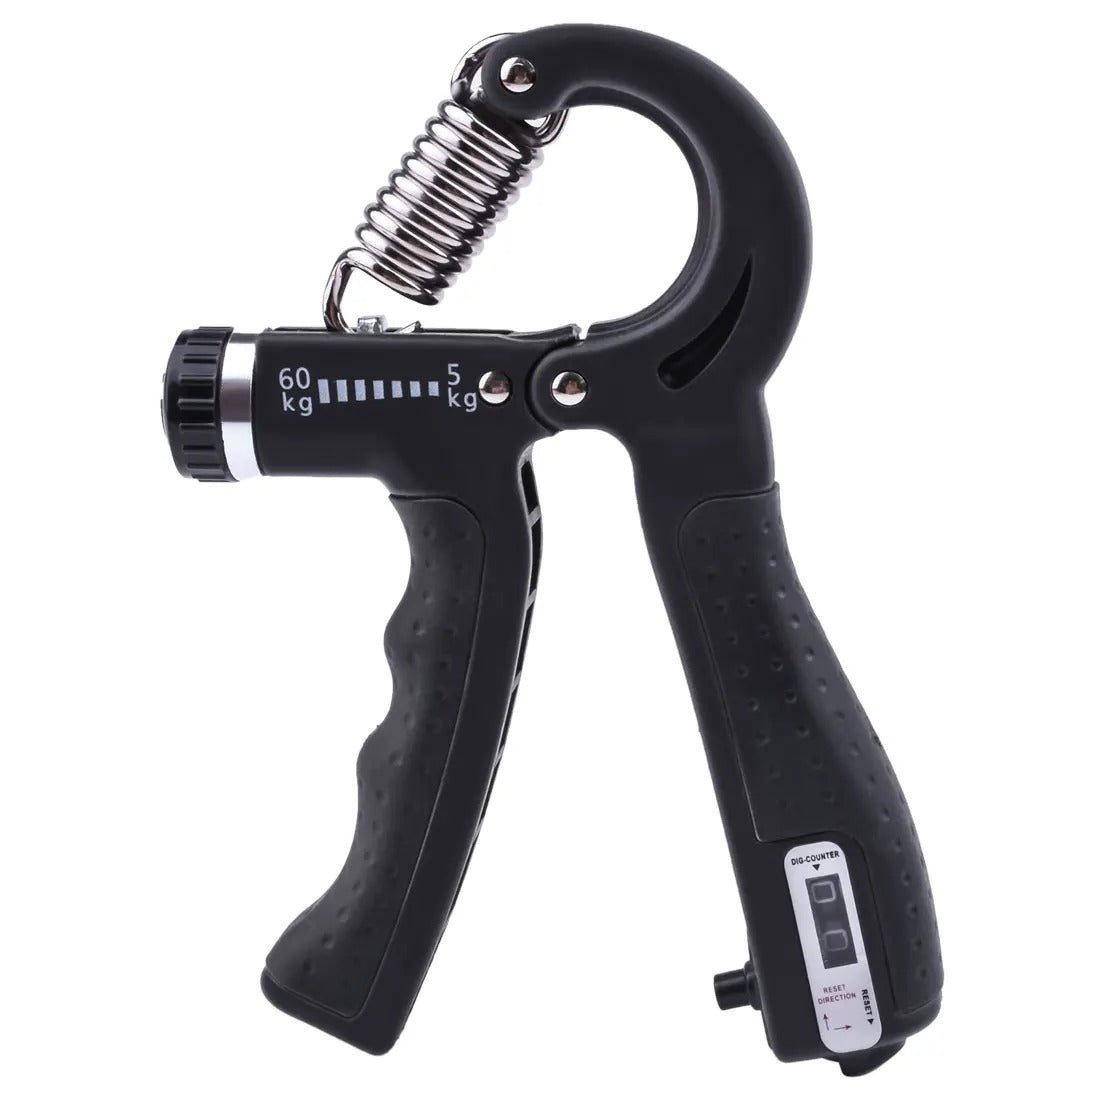 Grip Strengthener (Black with Counter Display) - Ascenssior